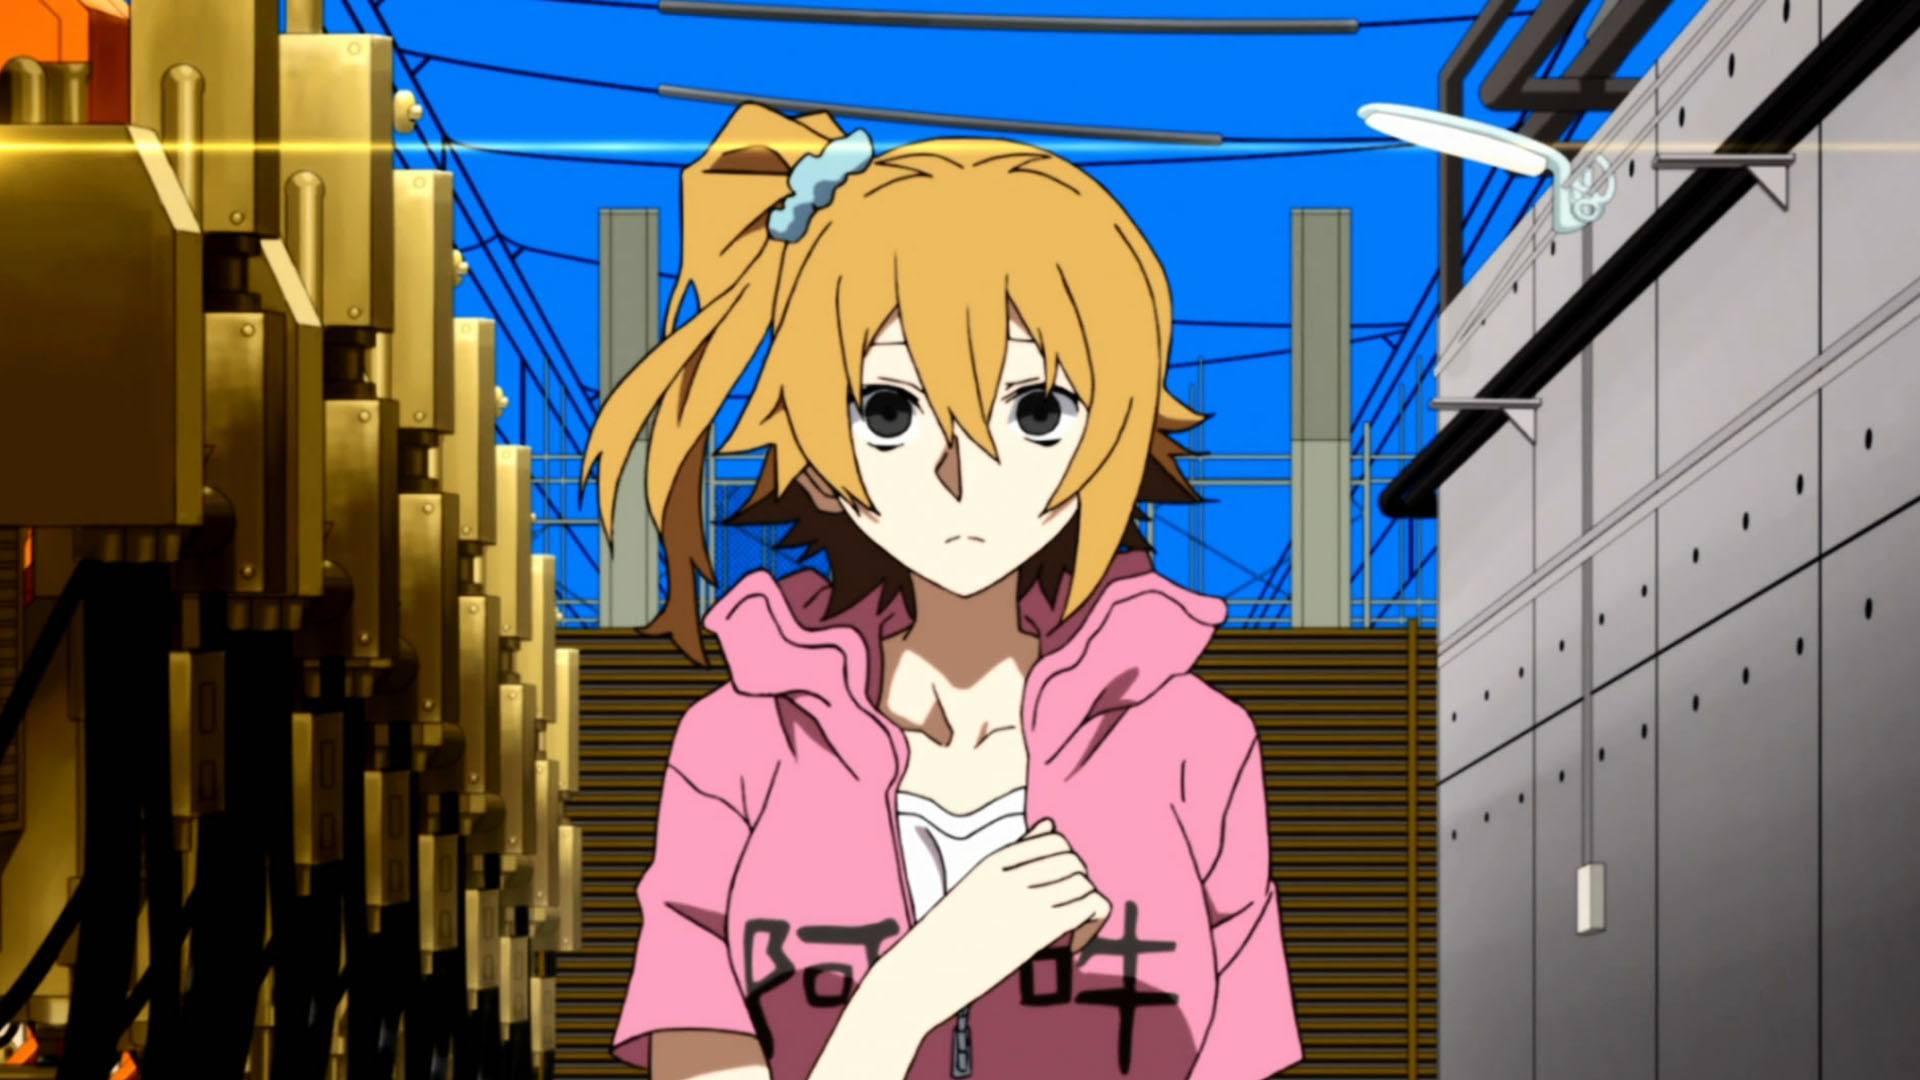 Anime: Do you really understand the story of Mekakucity Actors? Why or why  not? - Quora